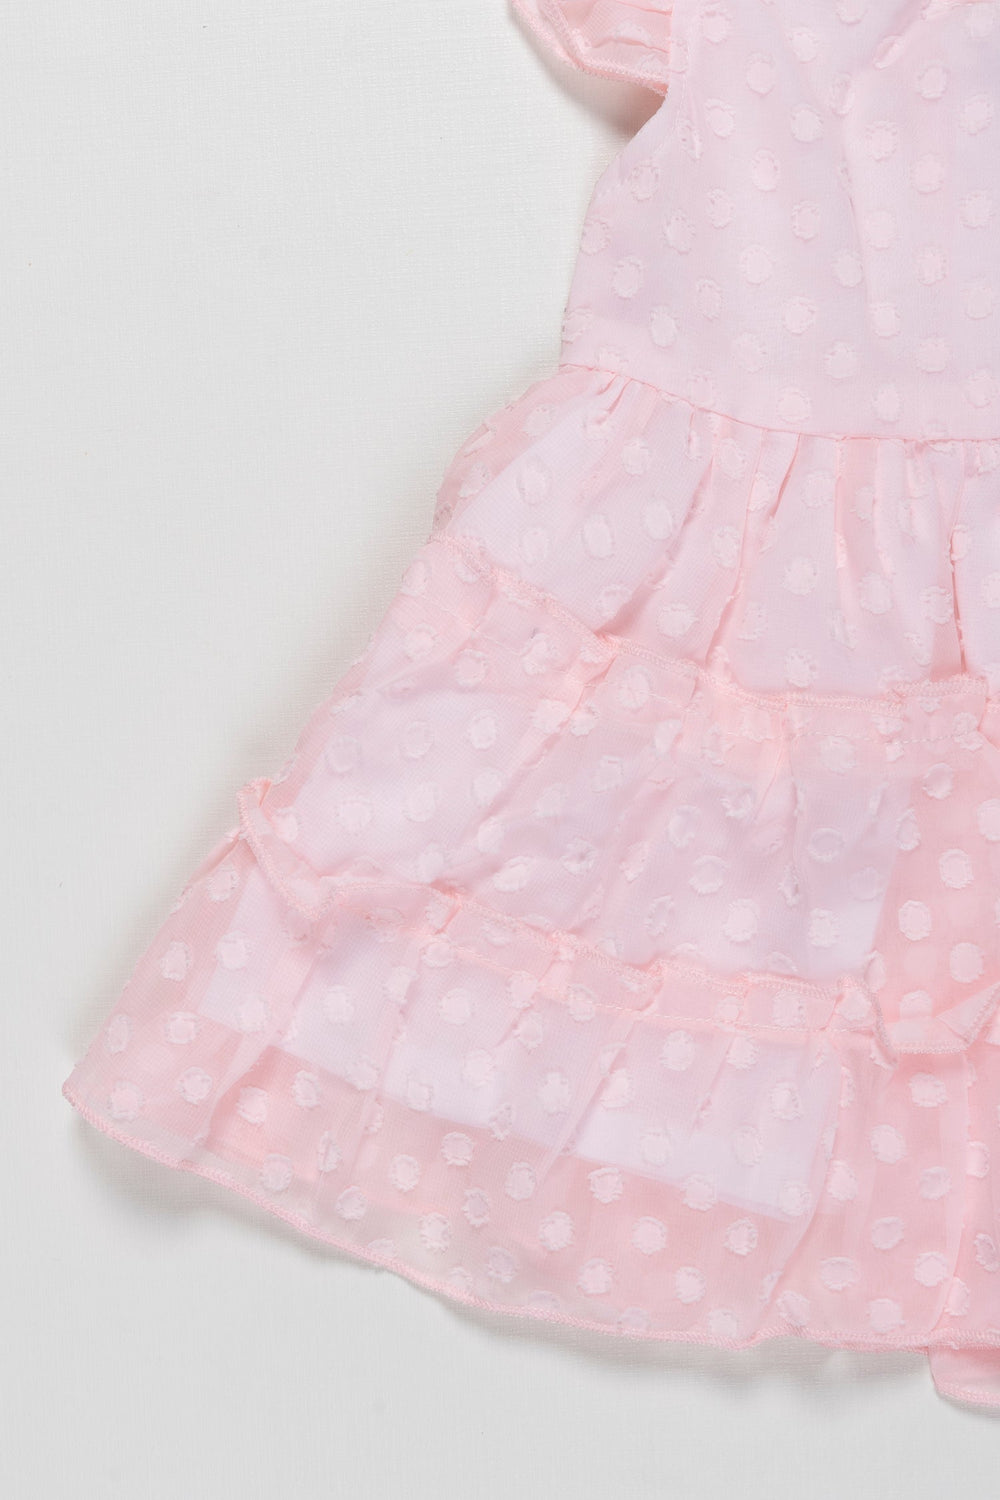 The Nesavu Baby Fancy Frock Whisper Pink Tulle Baby Frock with Polka Accents - Angelic Charm Nesavu Soft Pink Polka Dot Infant Dress | Comfy & Fashionable Baby Party Wear | The Nesavu